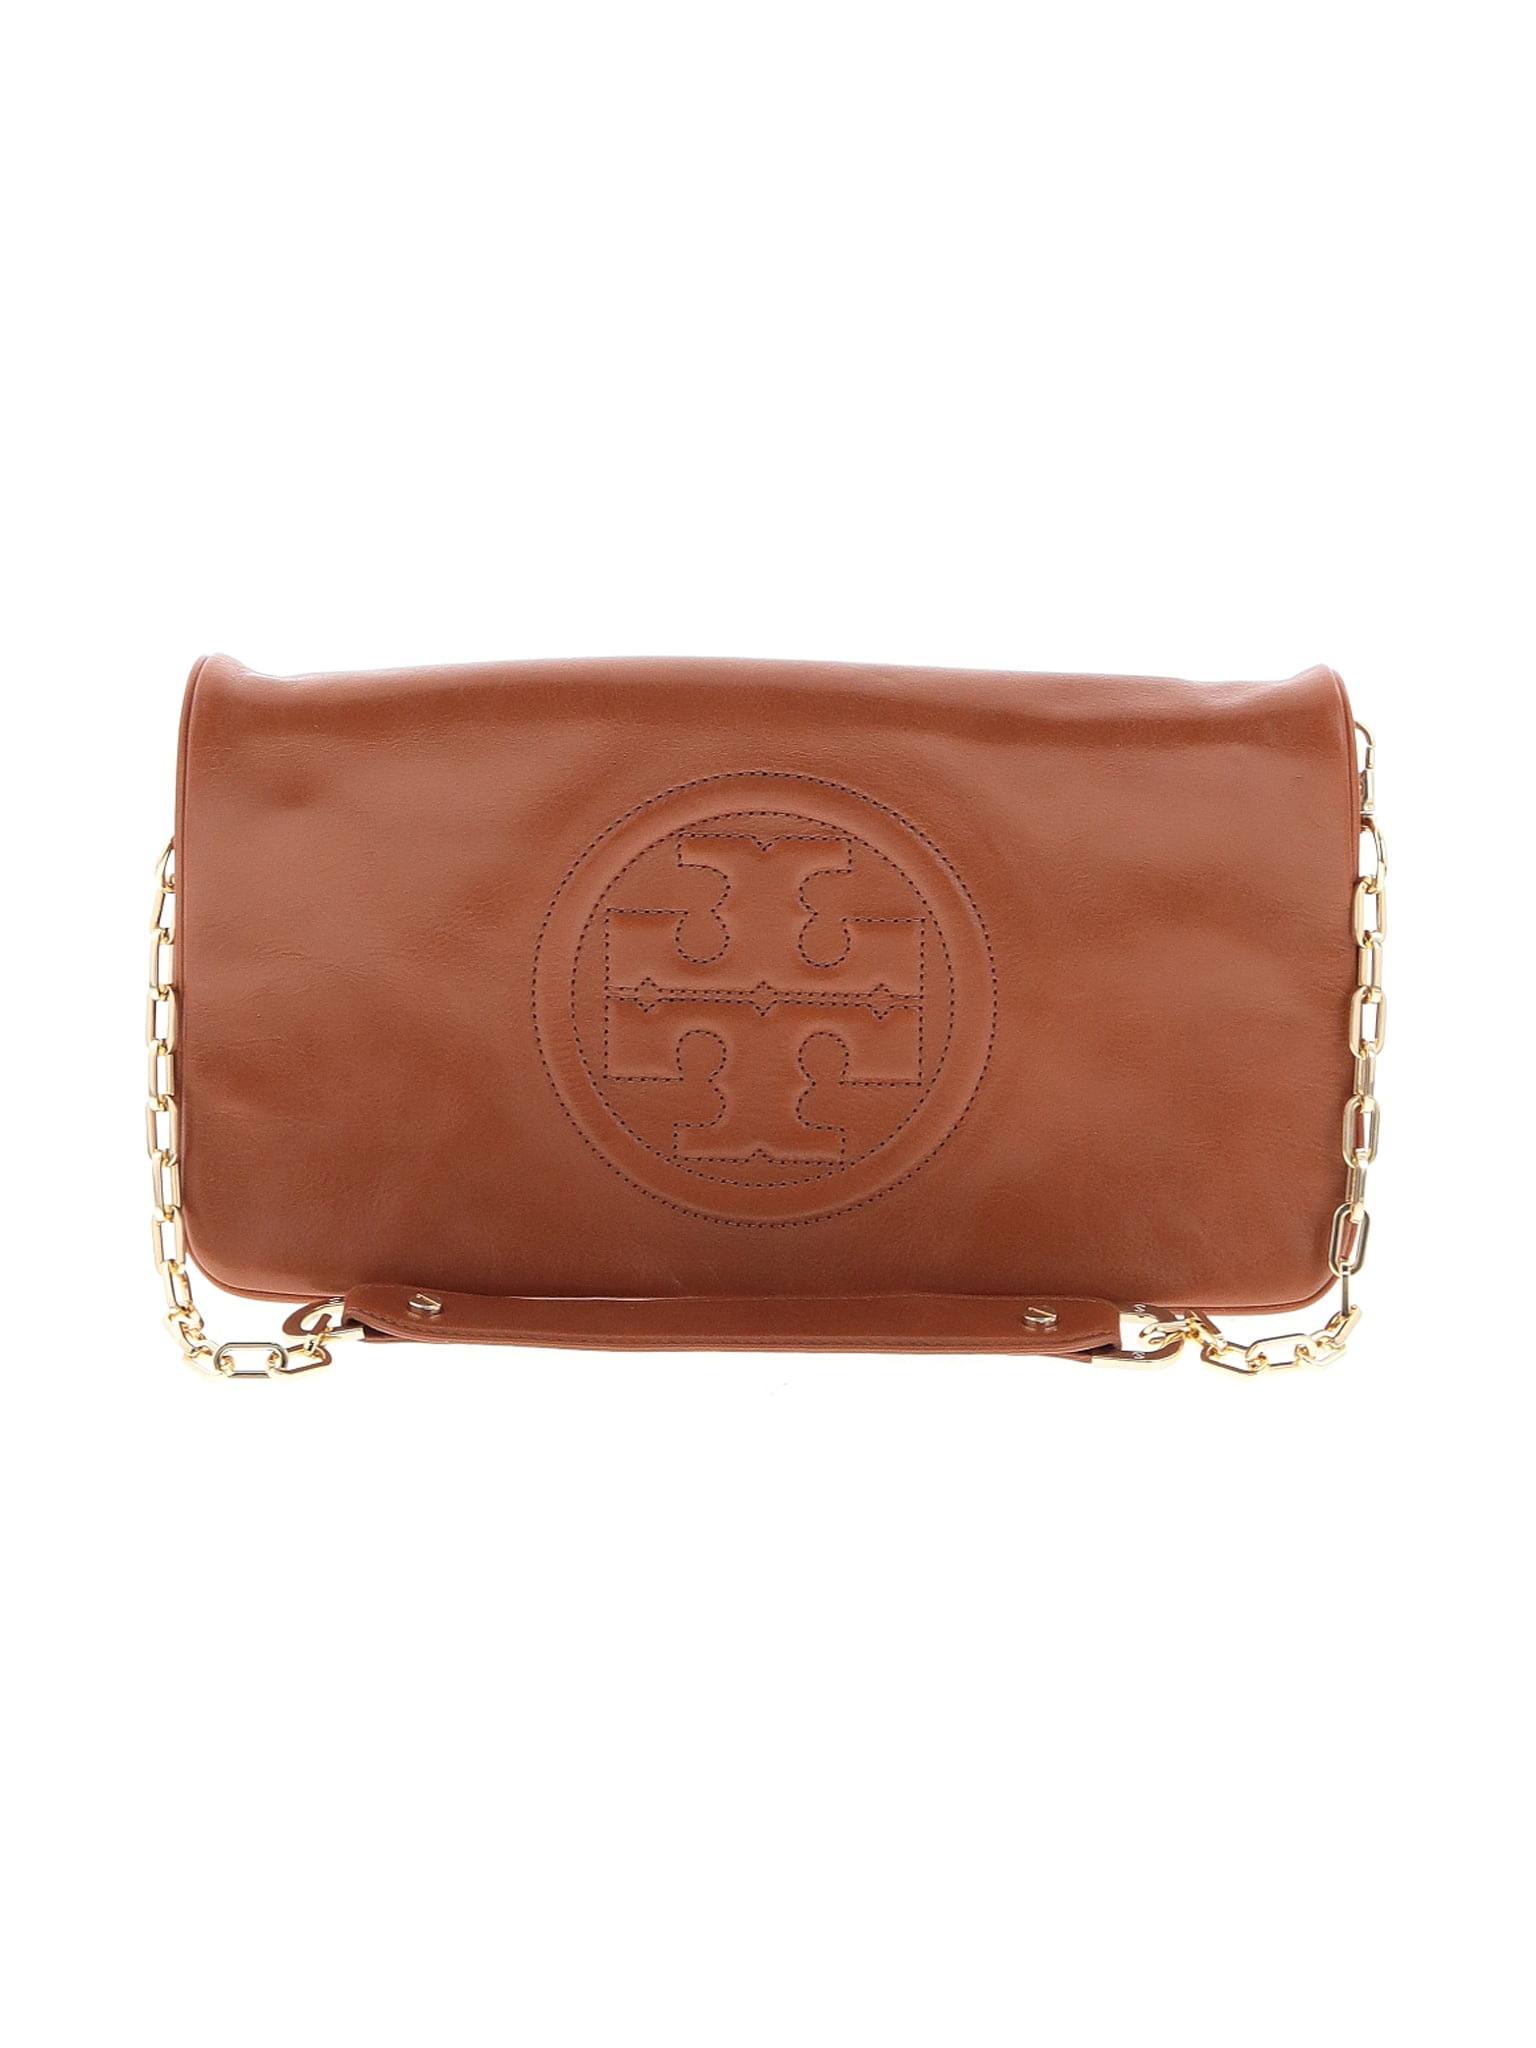 Tory Burch - Pre-Owned Tory Burch Women's One Size Fits All Leather ...